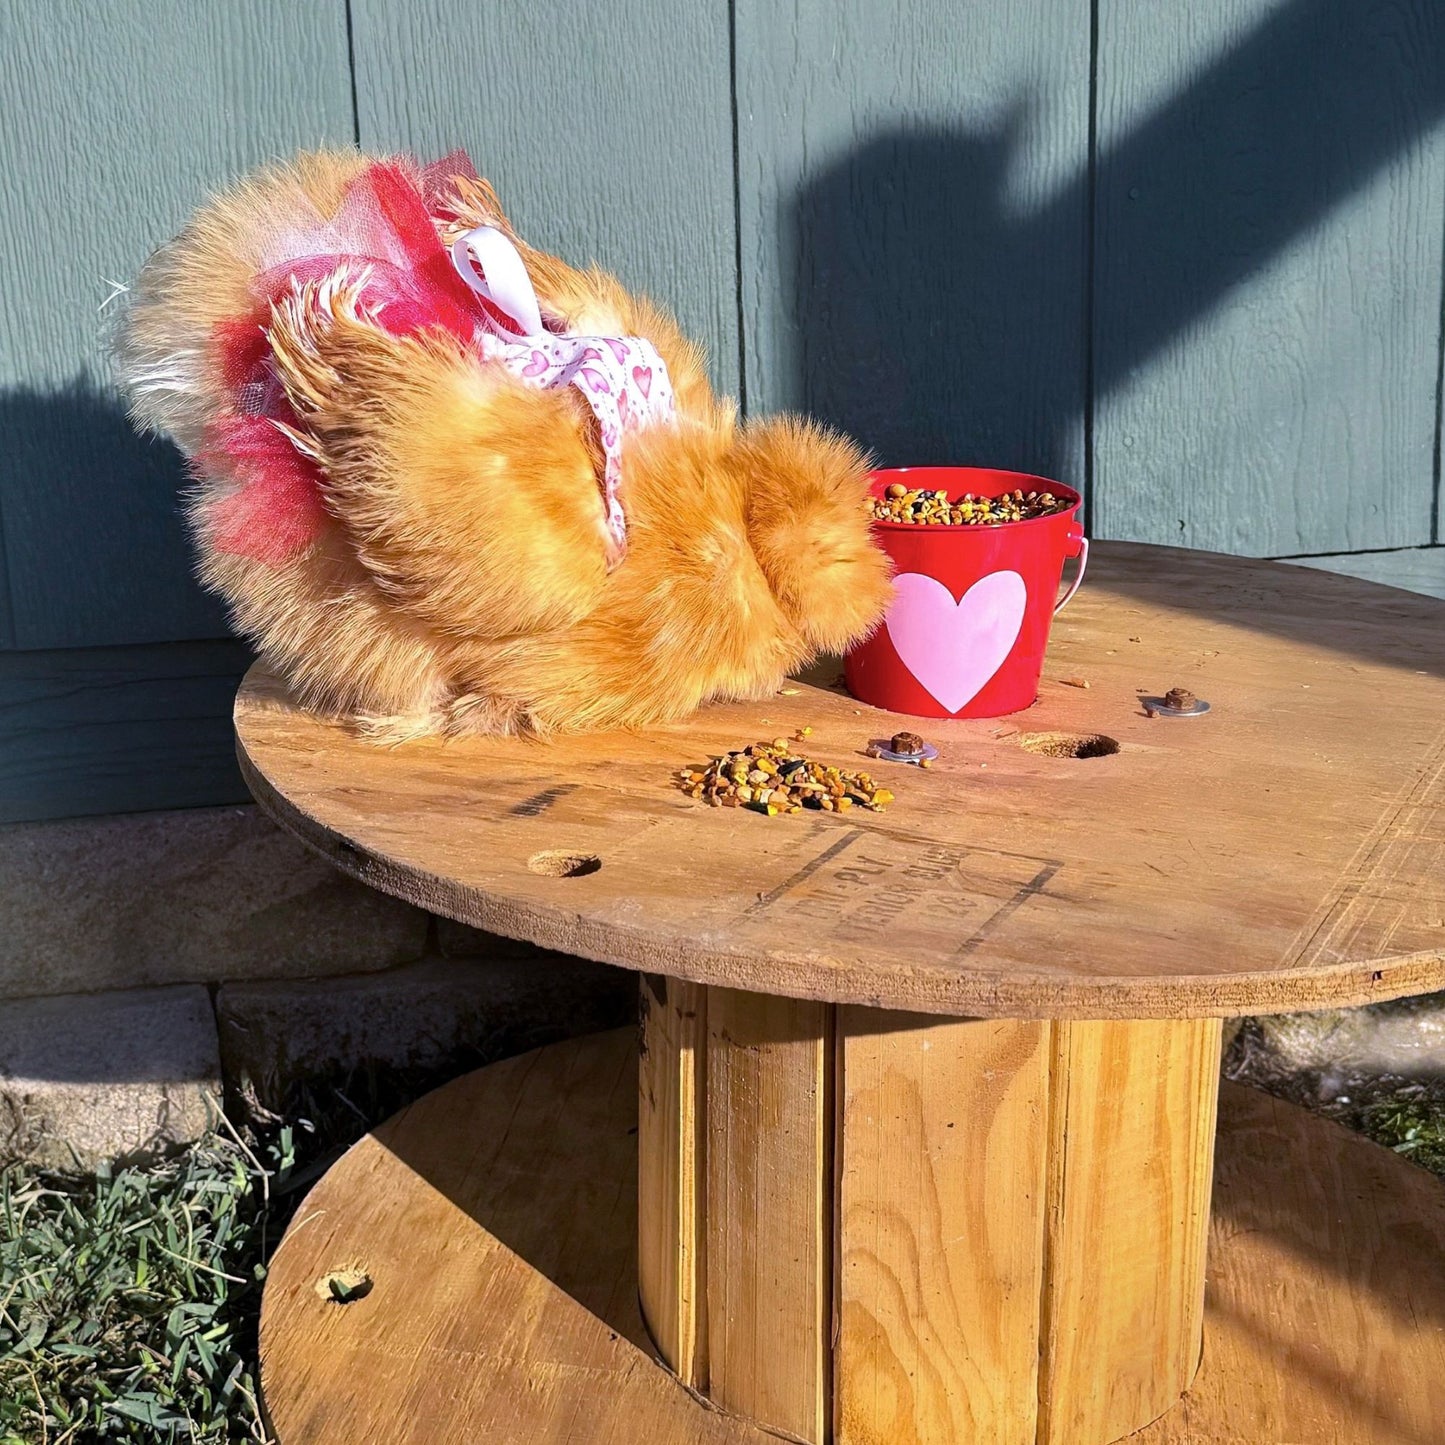 Chicken Tutu (So many colors & sizes!)